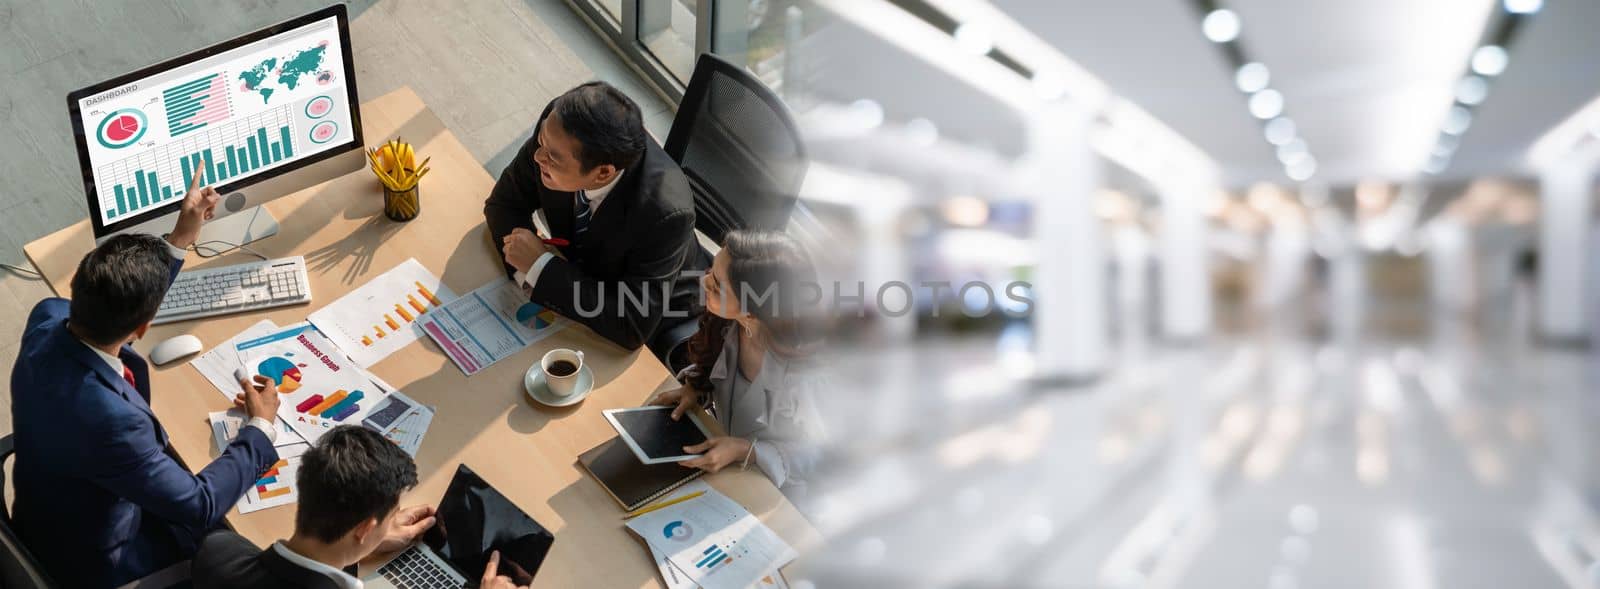 Smart businessman and businesswoman talking discussion in widen group meeting at office table in a modern office interior. Business collaboration strategic planning and brainstorming of coworkers.